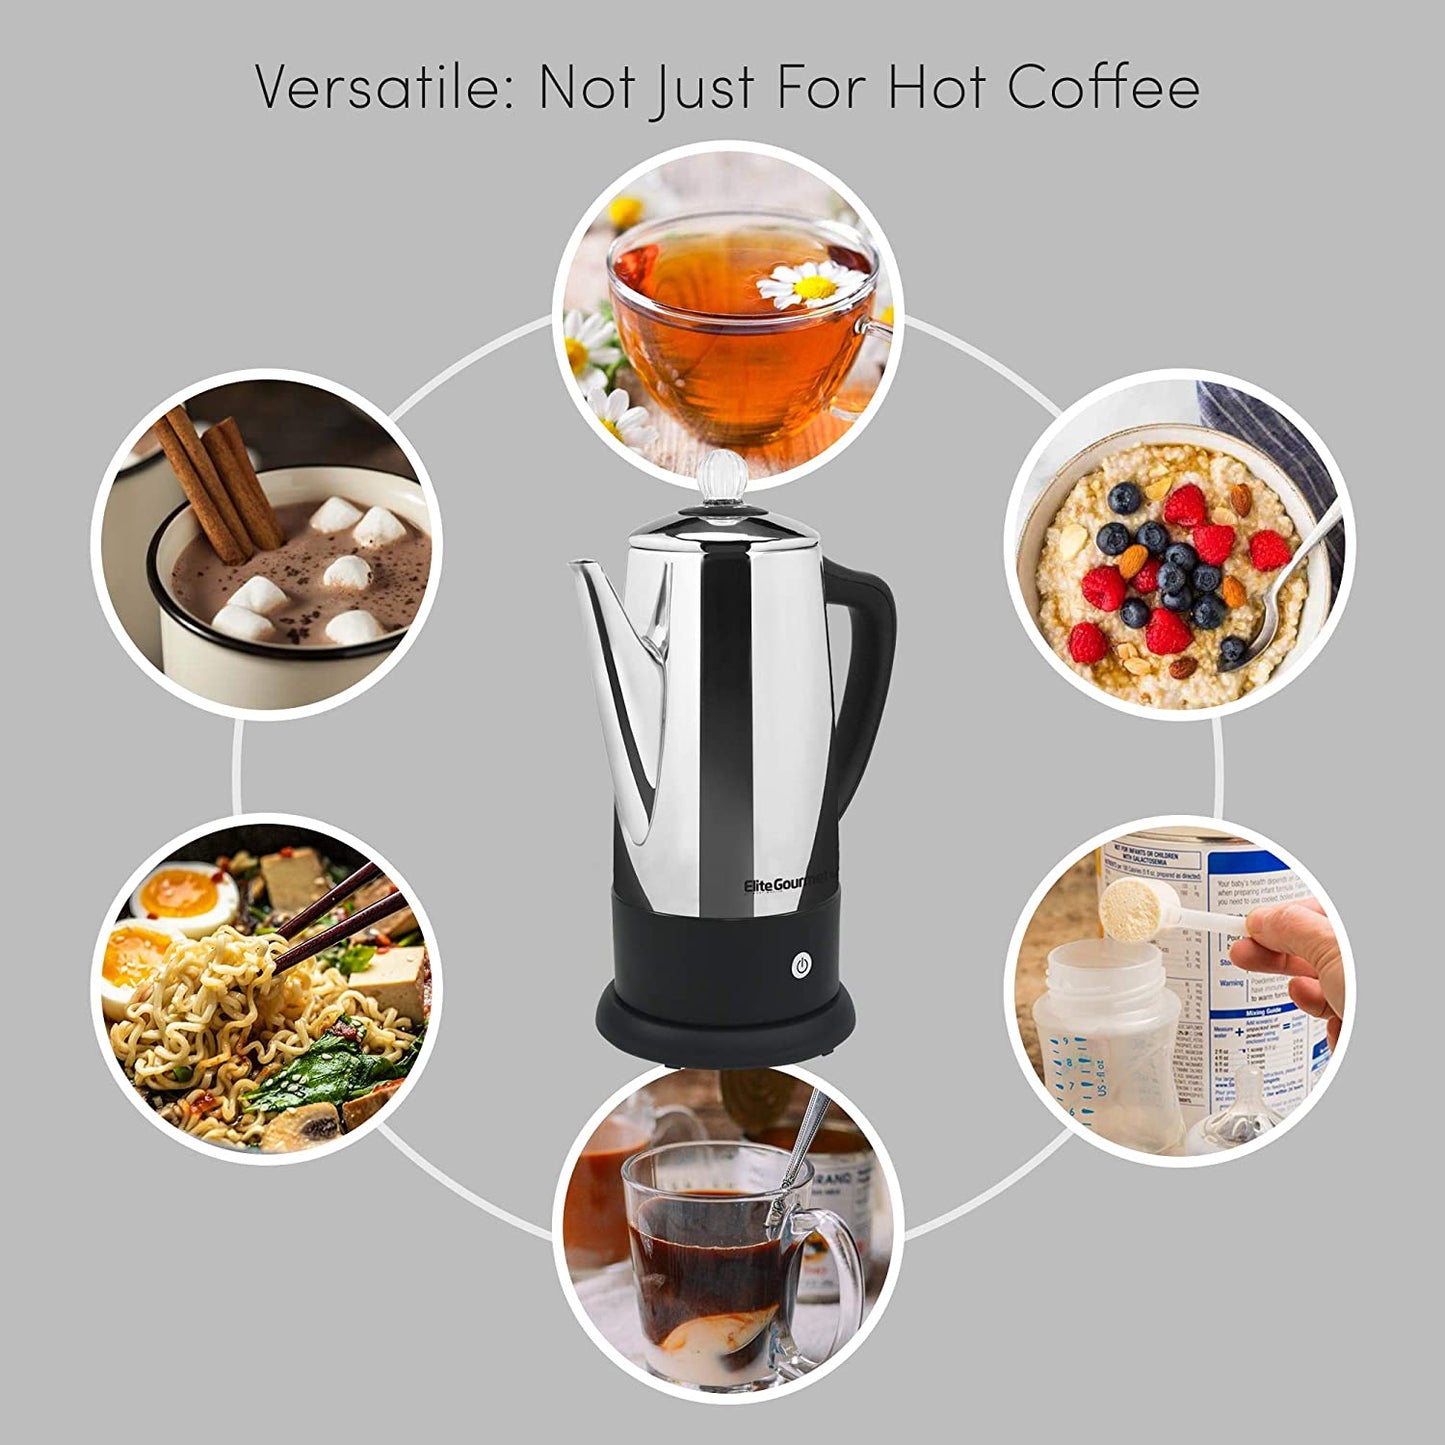 Professional Stainless Steel Electric Coffee Percolator with Keep Warm Feature, Clear Brew Progress Knob, Cool-Touch Handle, Cordless Serve - 12 Cups